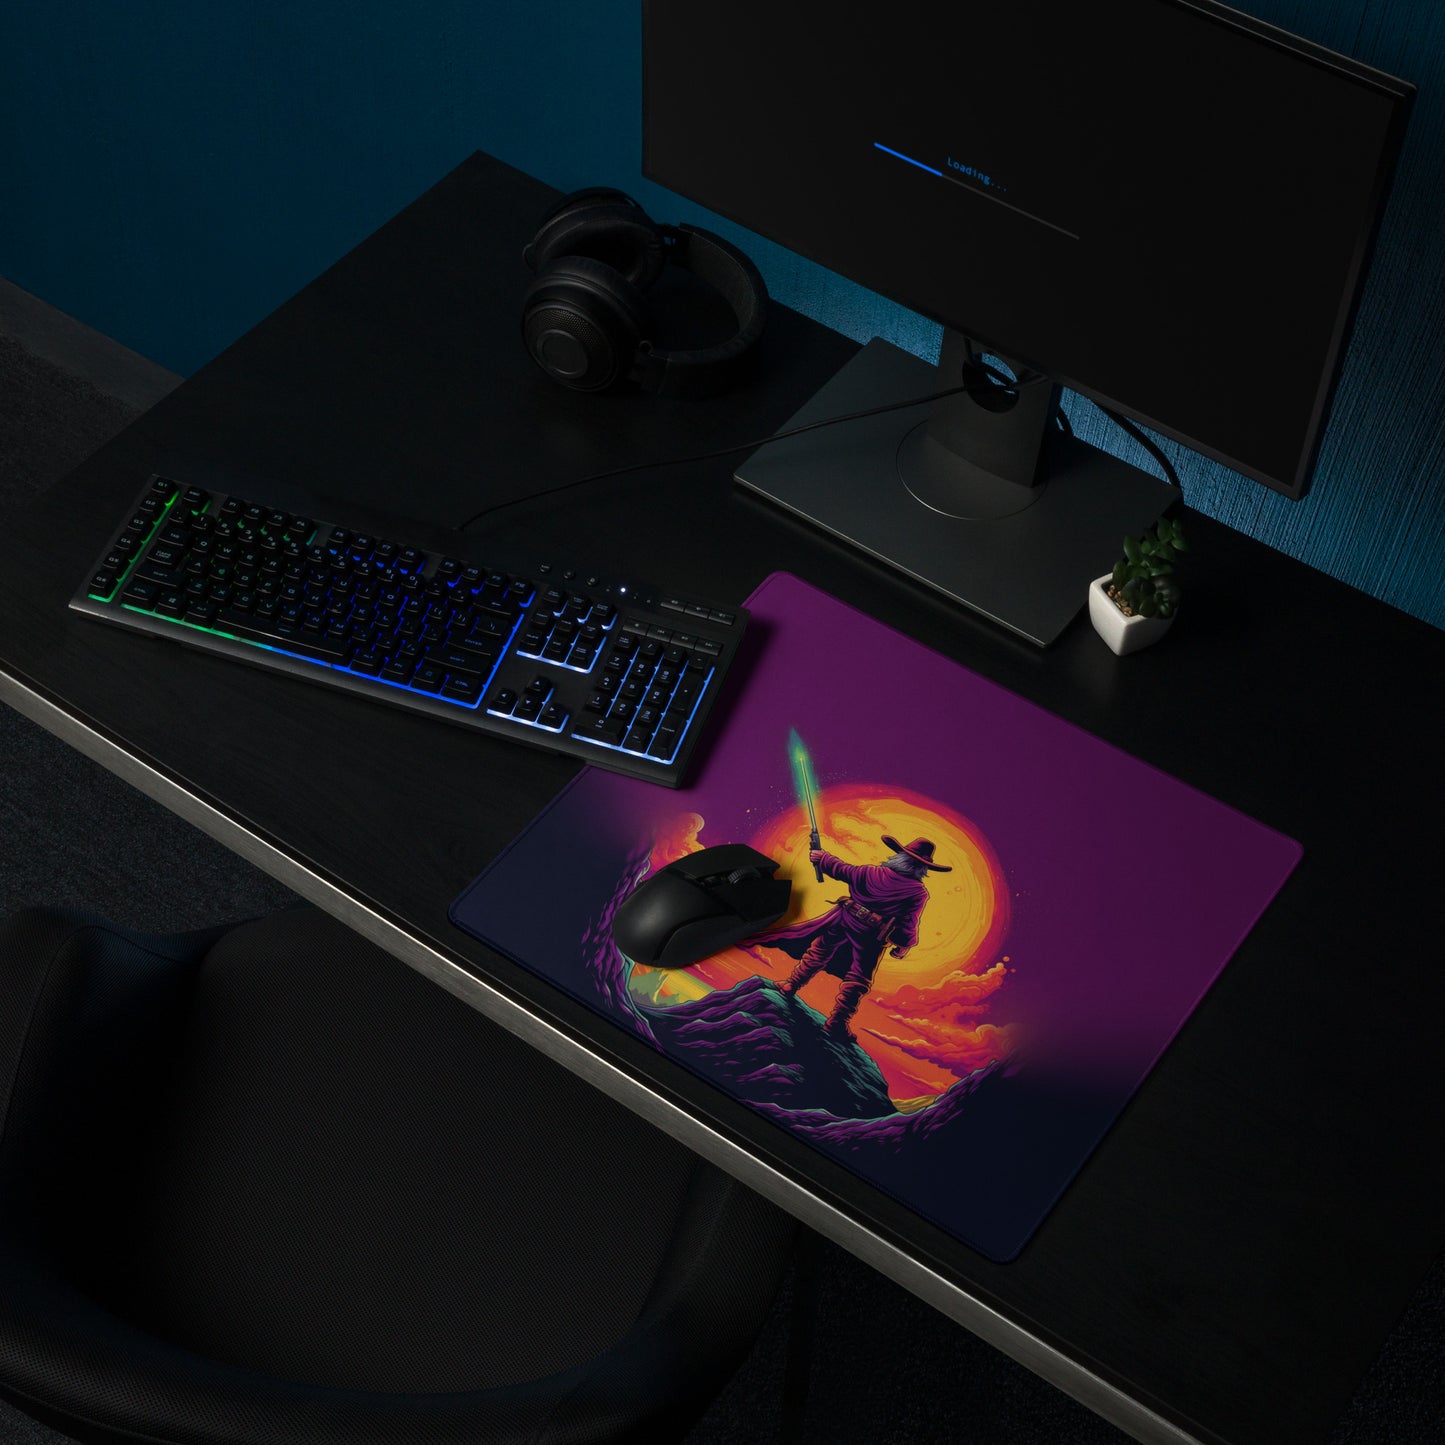 A 18" x 16" desk pad with a cowboy holding a glowing sword looking at the sunset sitting on a desk.